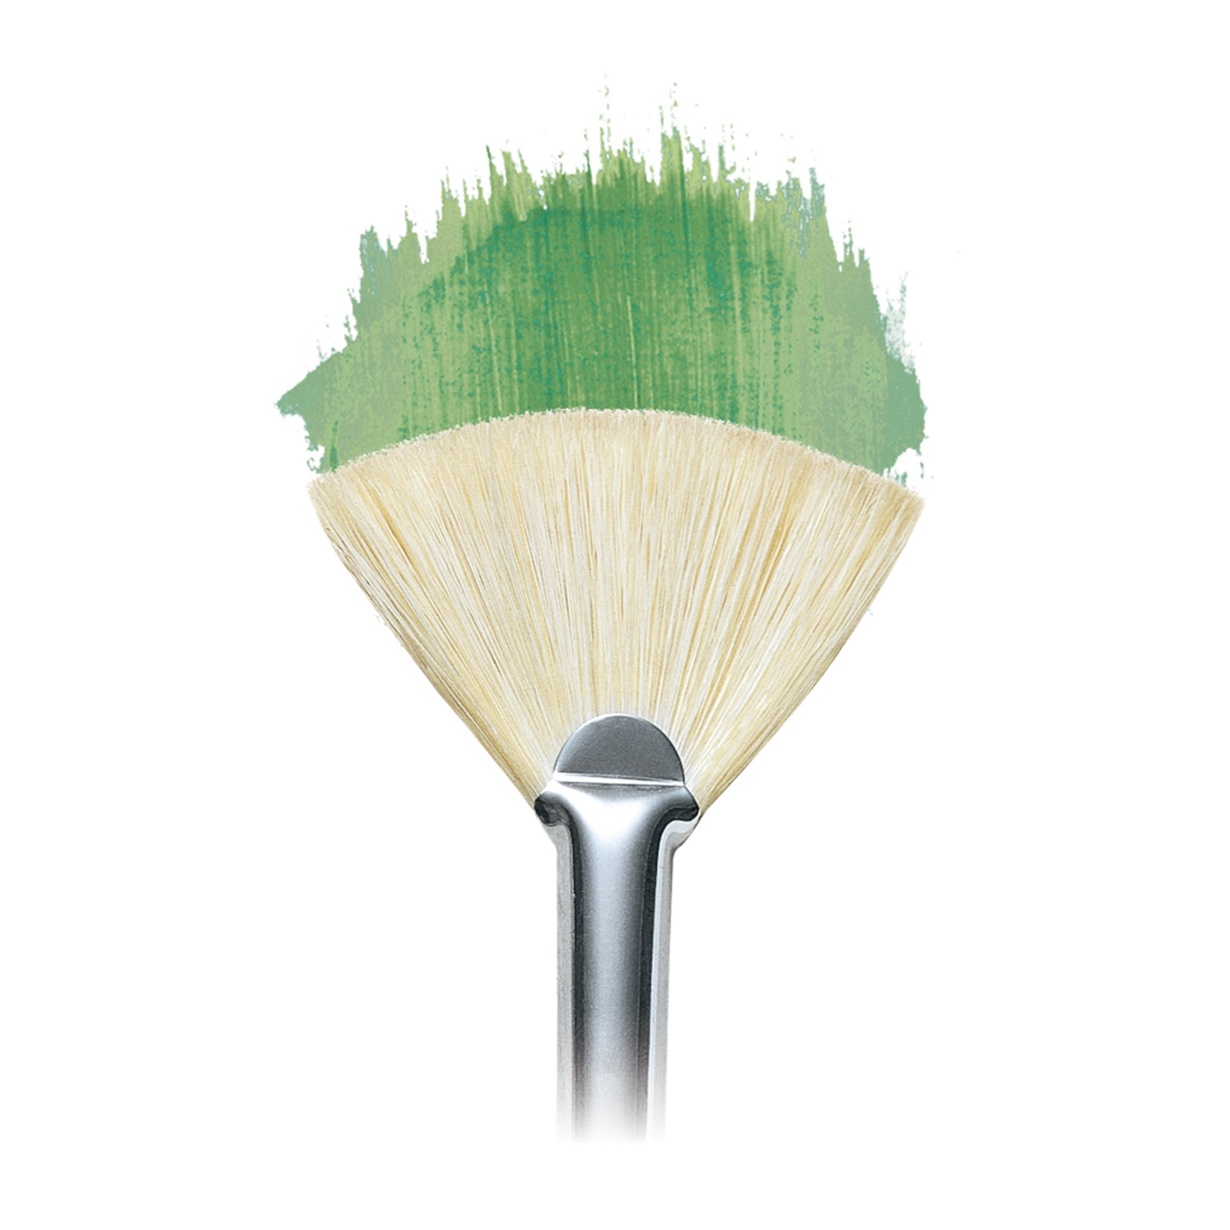 Winton Hog Brush Fan 5 in the group Art Supplies / Brushes / Natural Hair Brushes at Pen Store (107663)